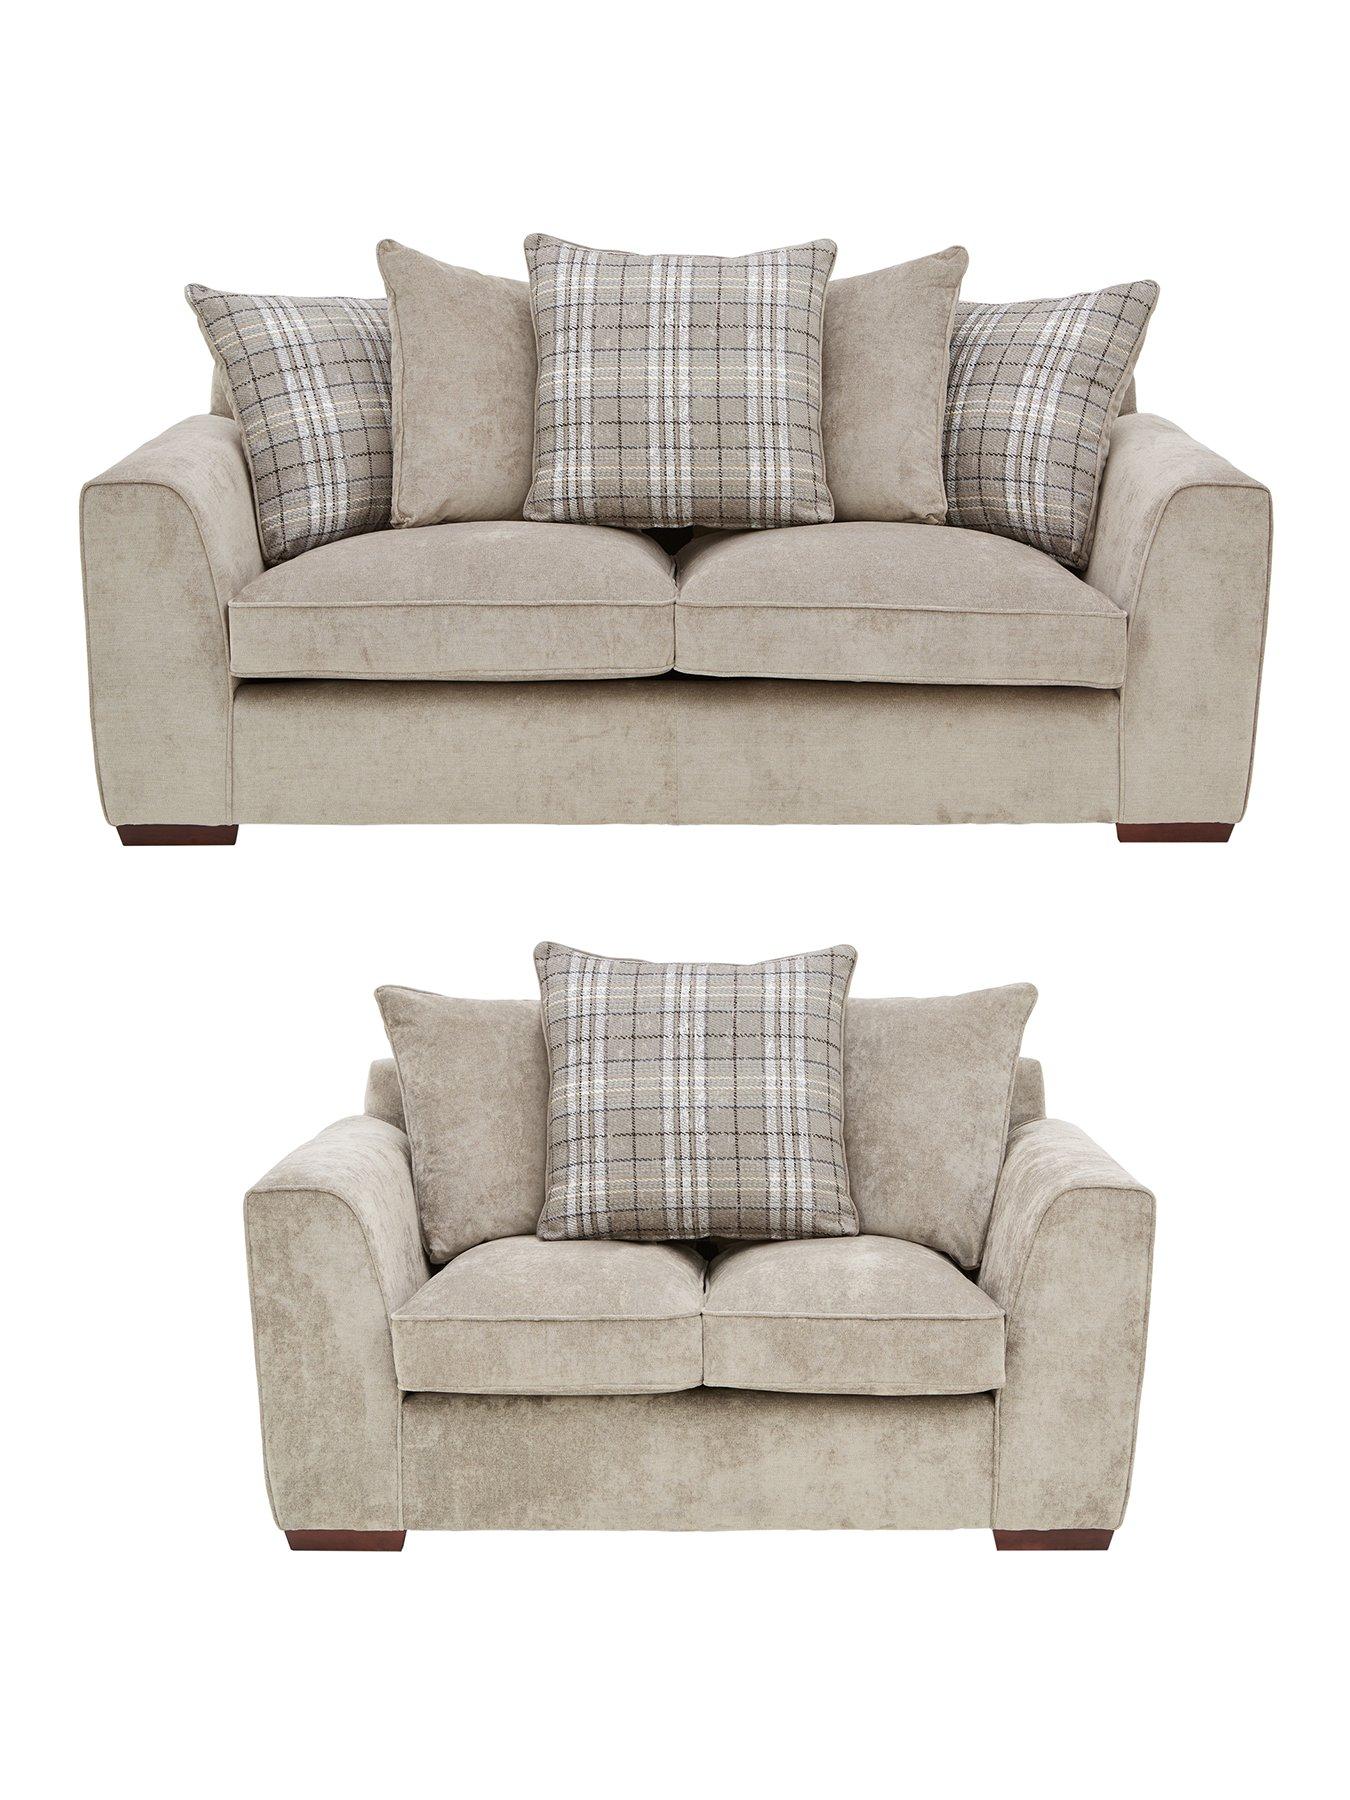 Campbell Fabric 3 Seater 2 Seater Scatter Back Sofa Set Buy And Save